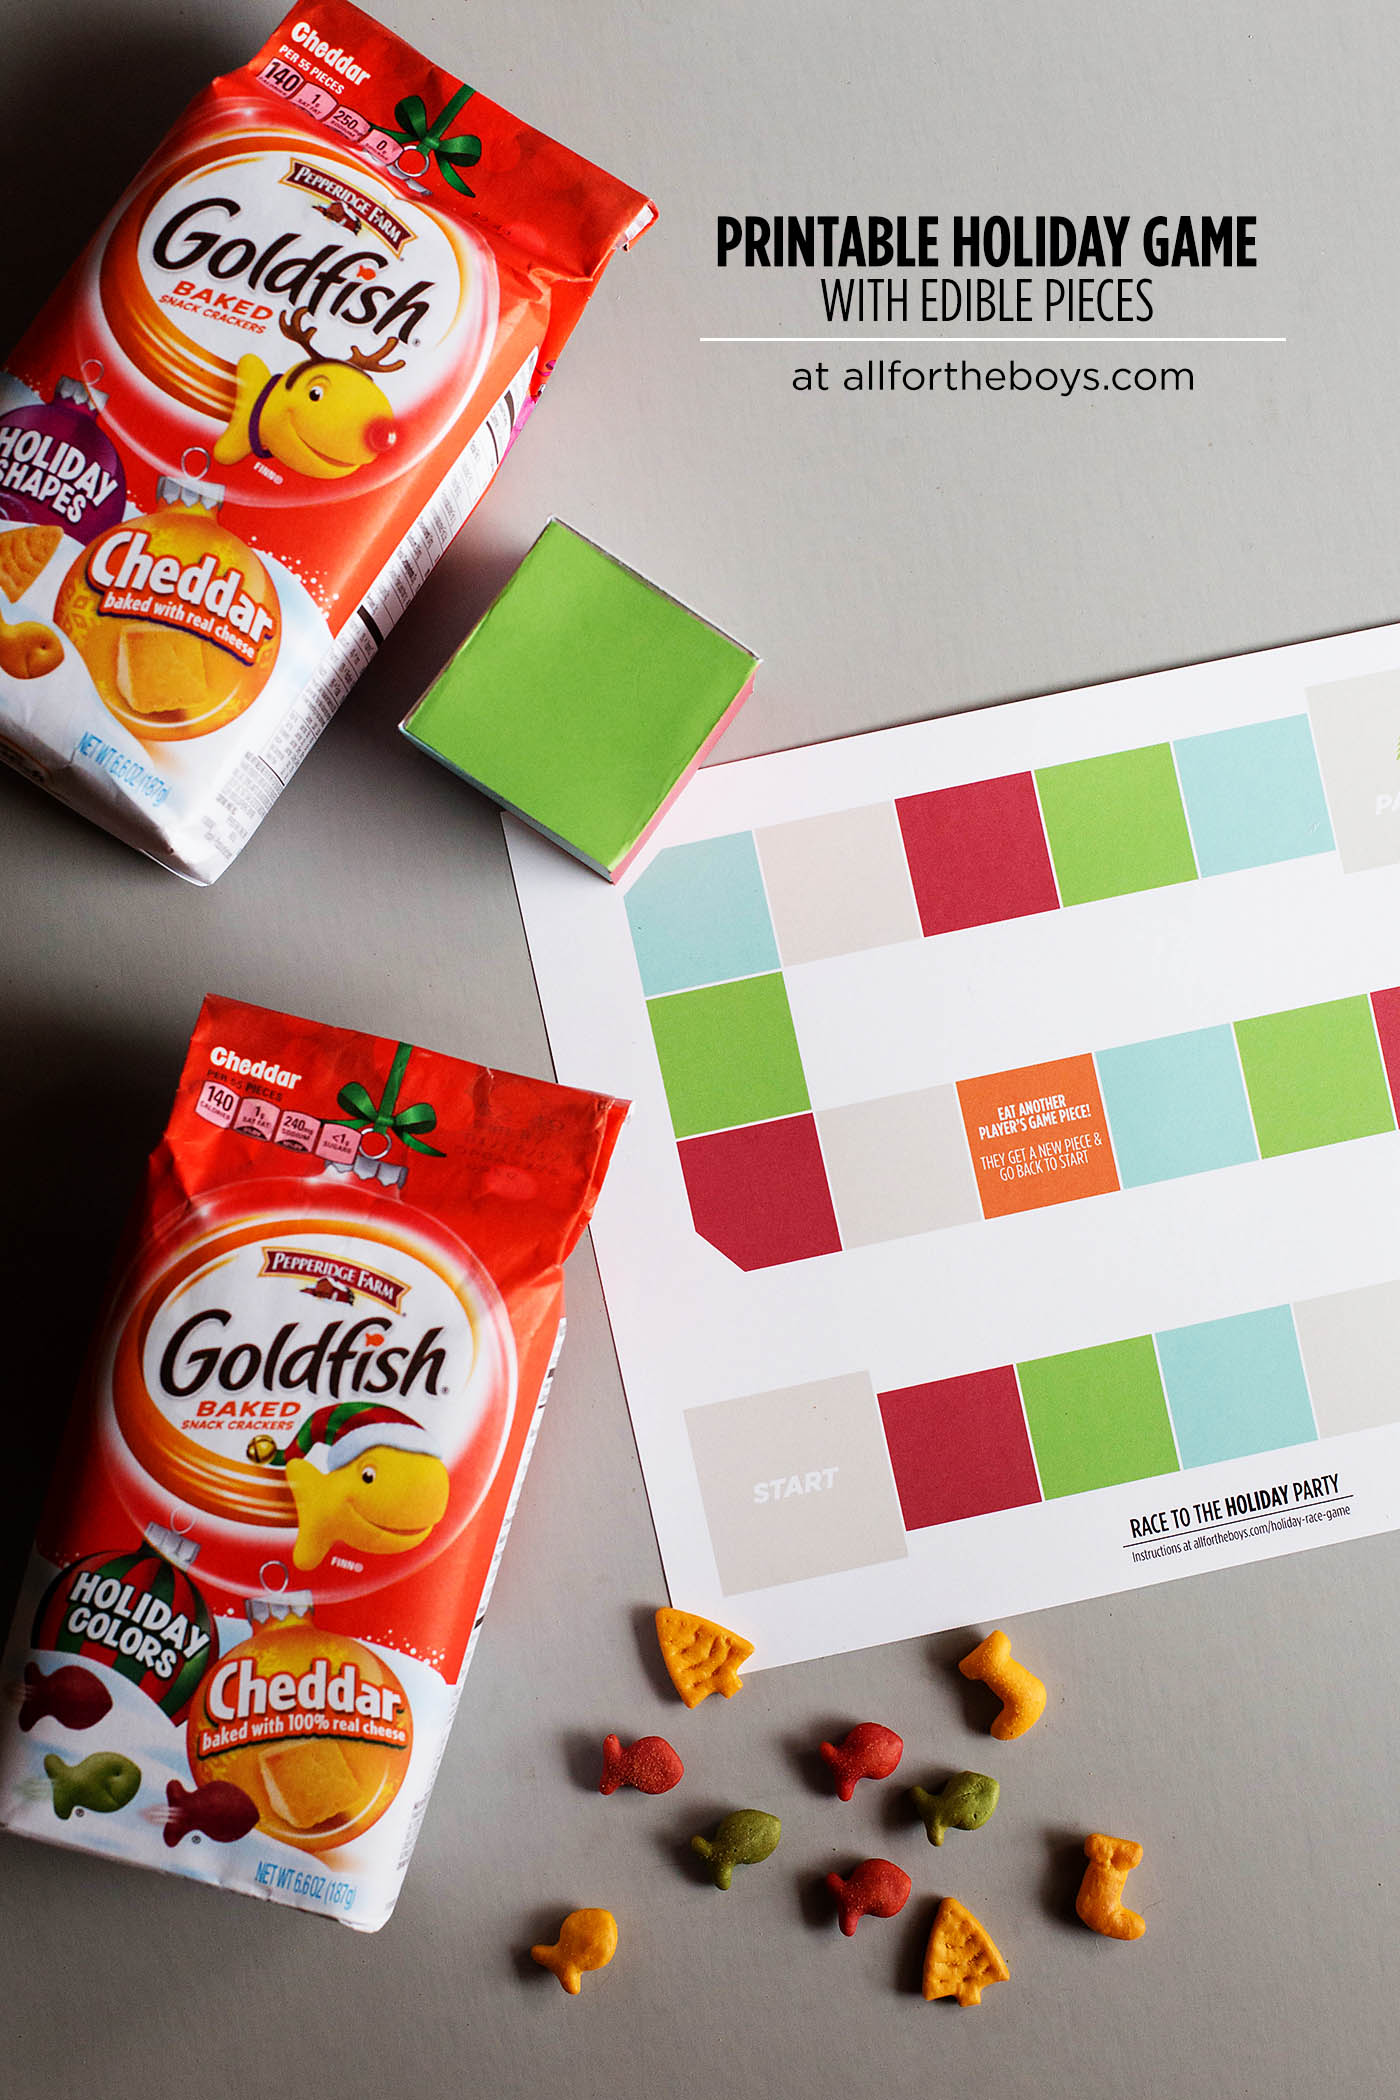 Printable holiday game with edible playing pieces!